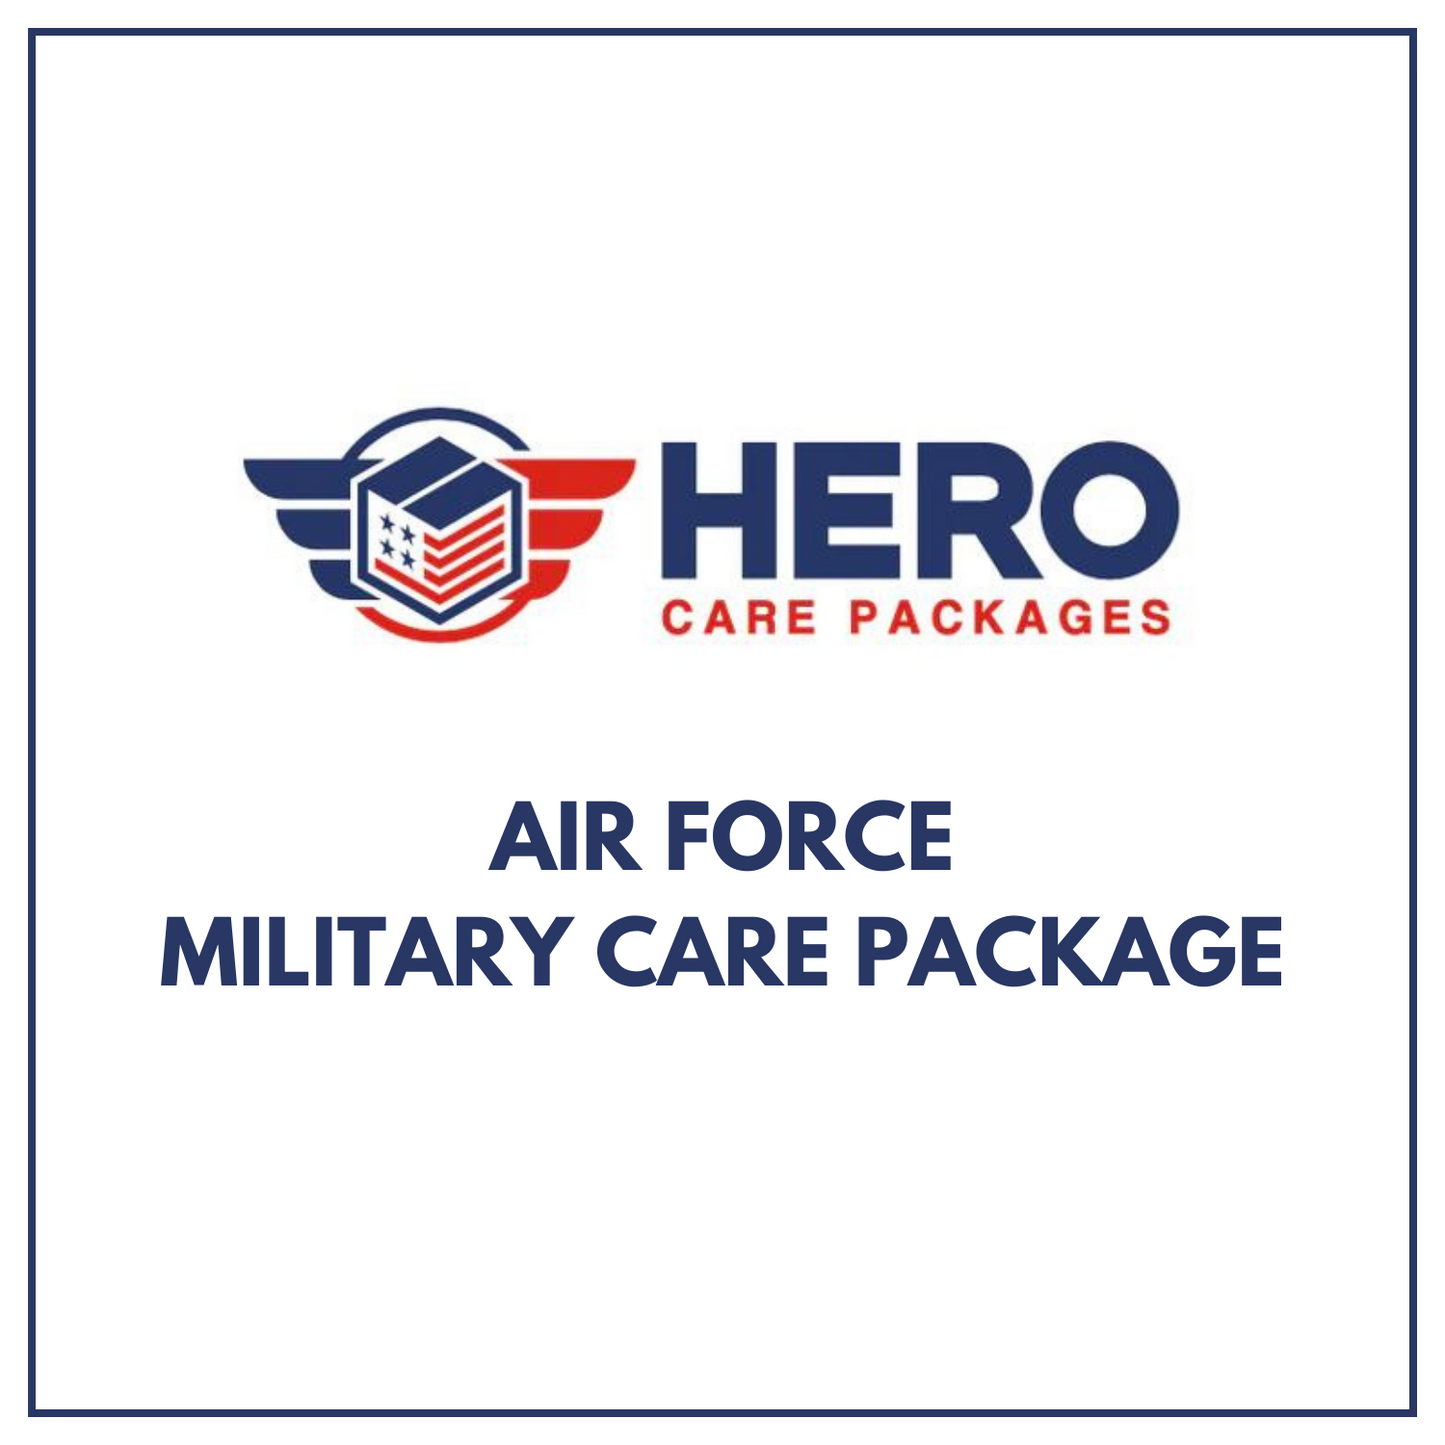 Air Force Military Care Package - Custom